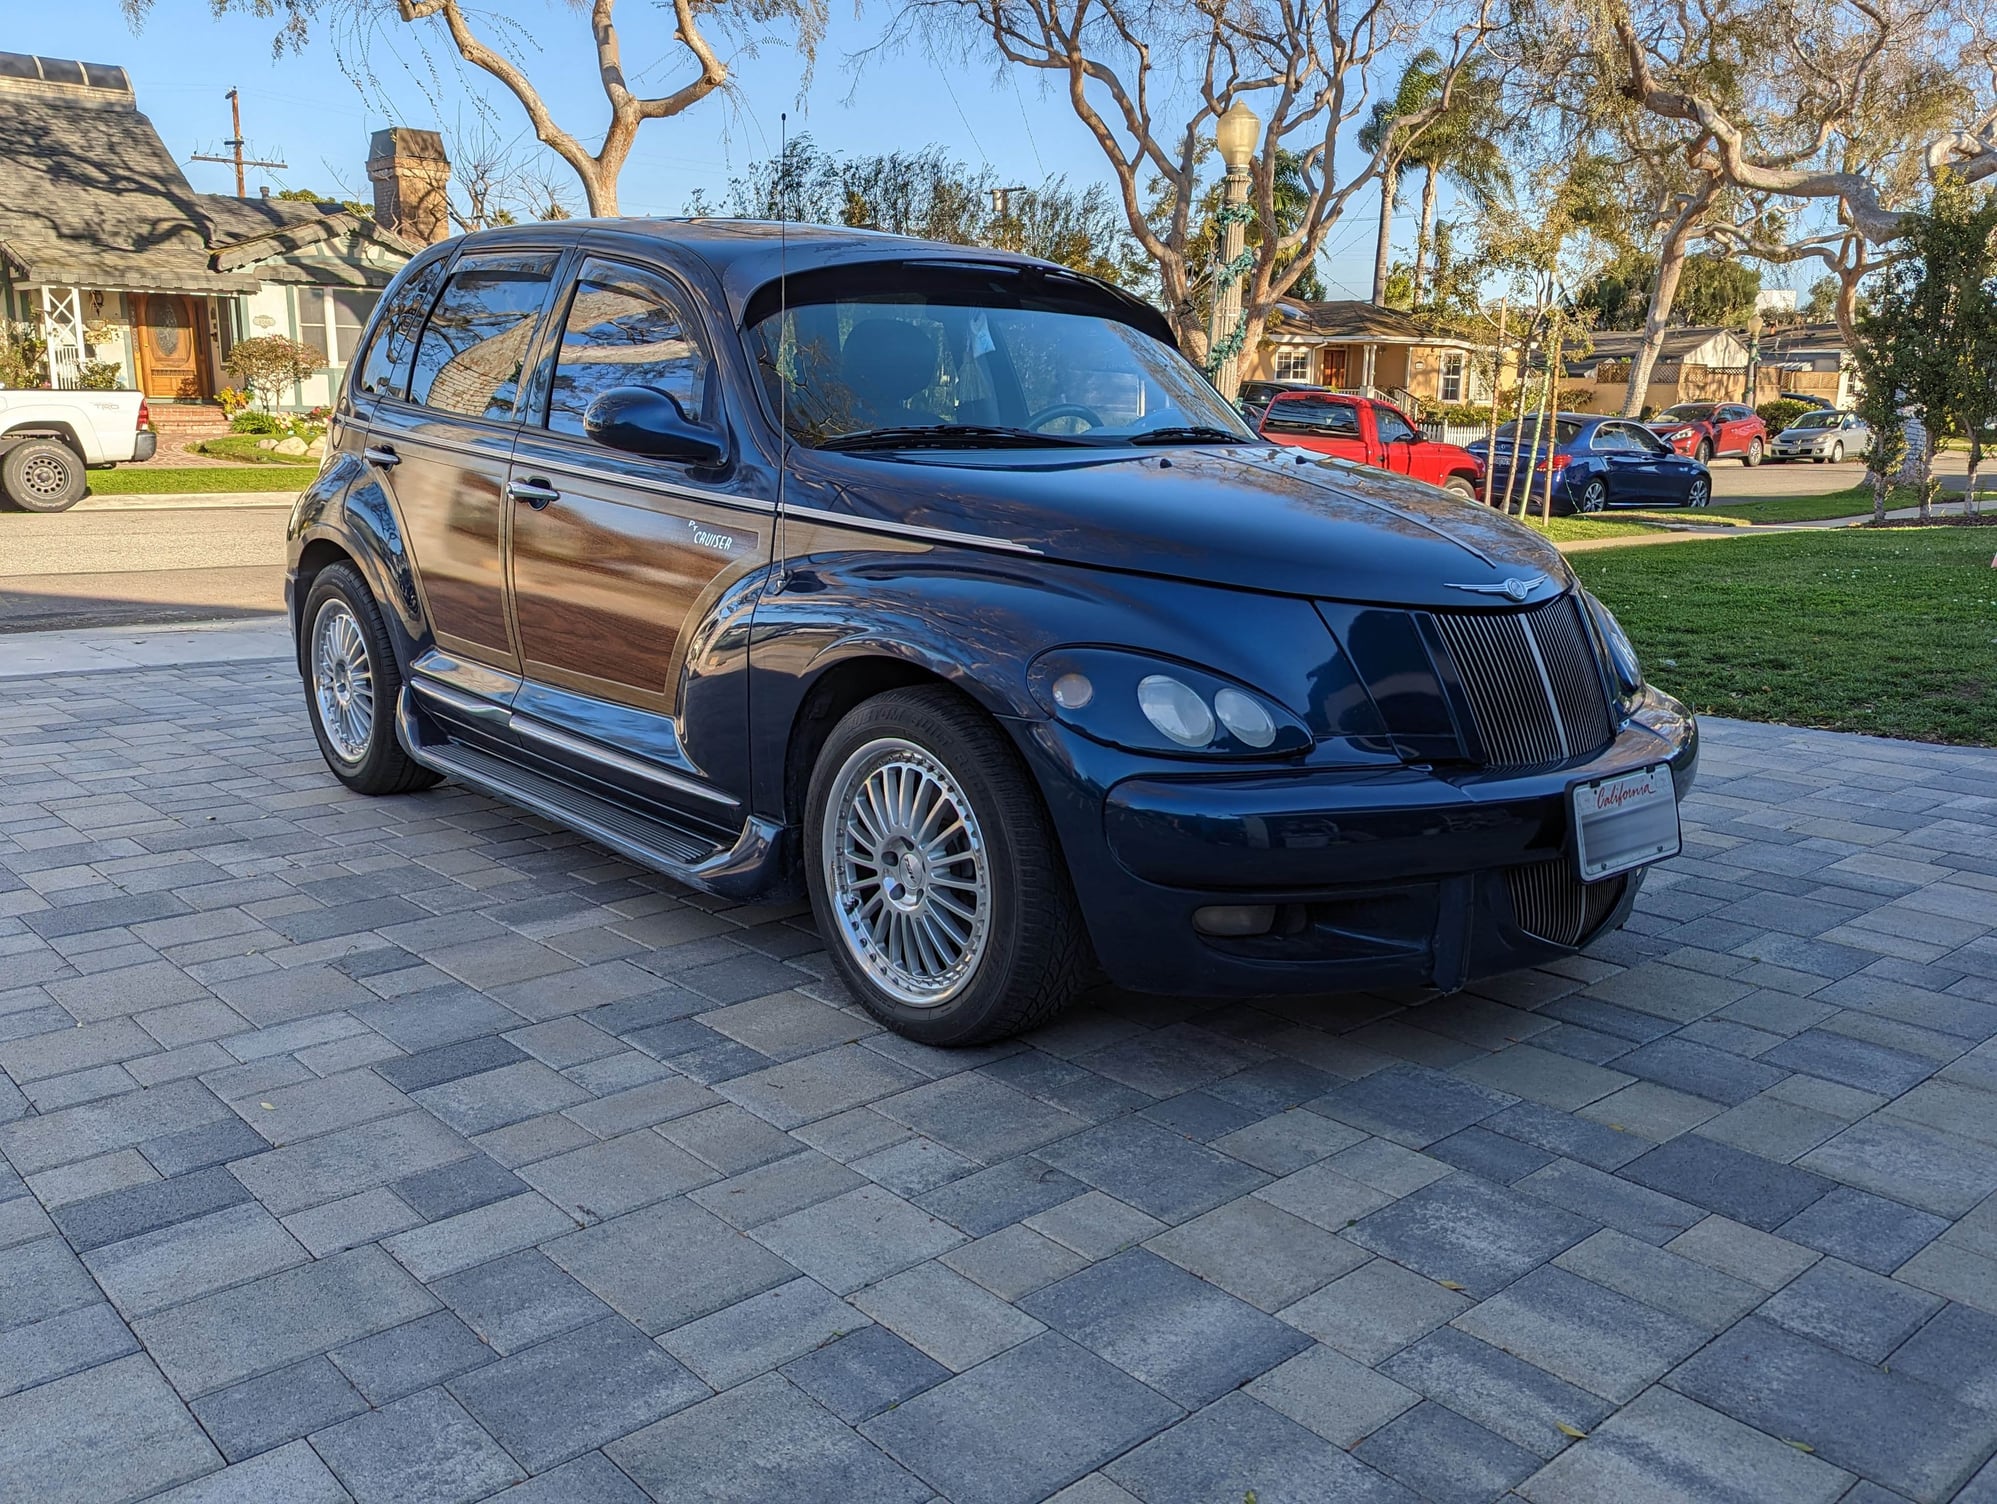 2004 Chrysler PT Cruiser - 2004 Chrysler PT Cruiser Limited "Woody Turbo Classic - One of a Kind" - Used - VIN 3C8FY68854T209578 - 117,979 Miles - 4 cyl - 2WD - Sedan - Blue - Los Angeles, CA 90066, United States